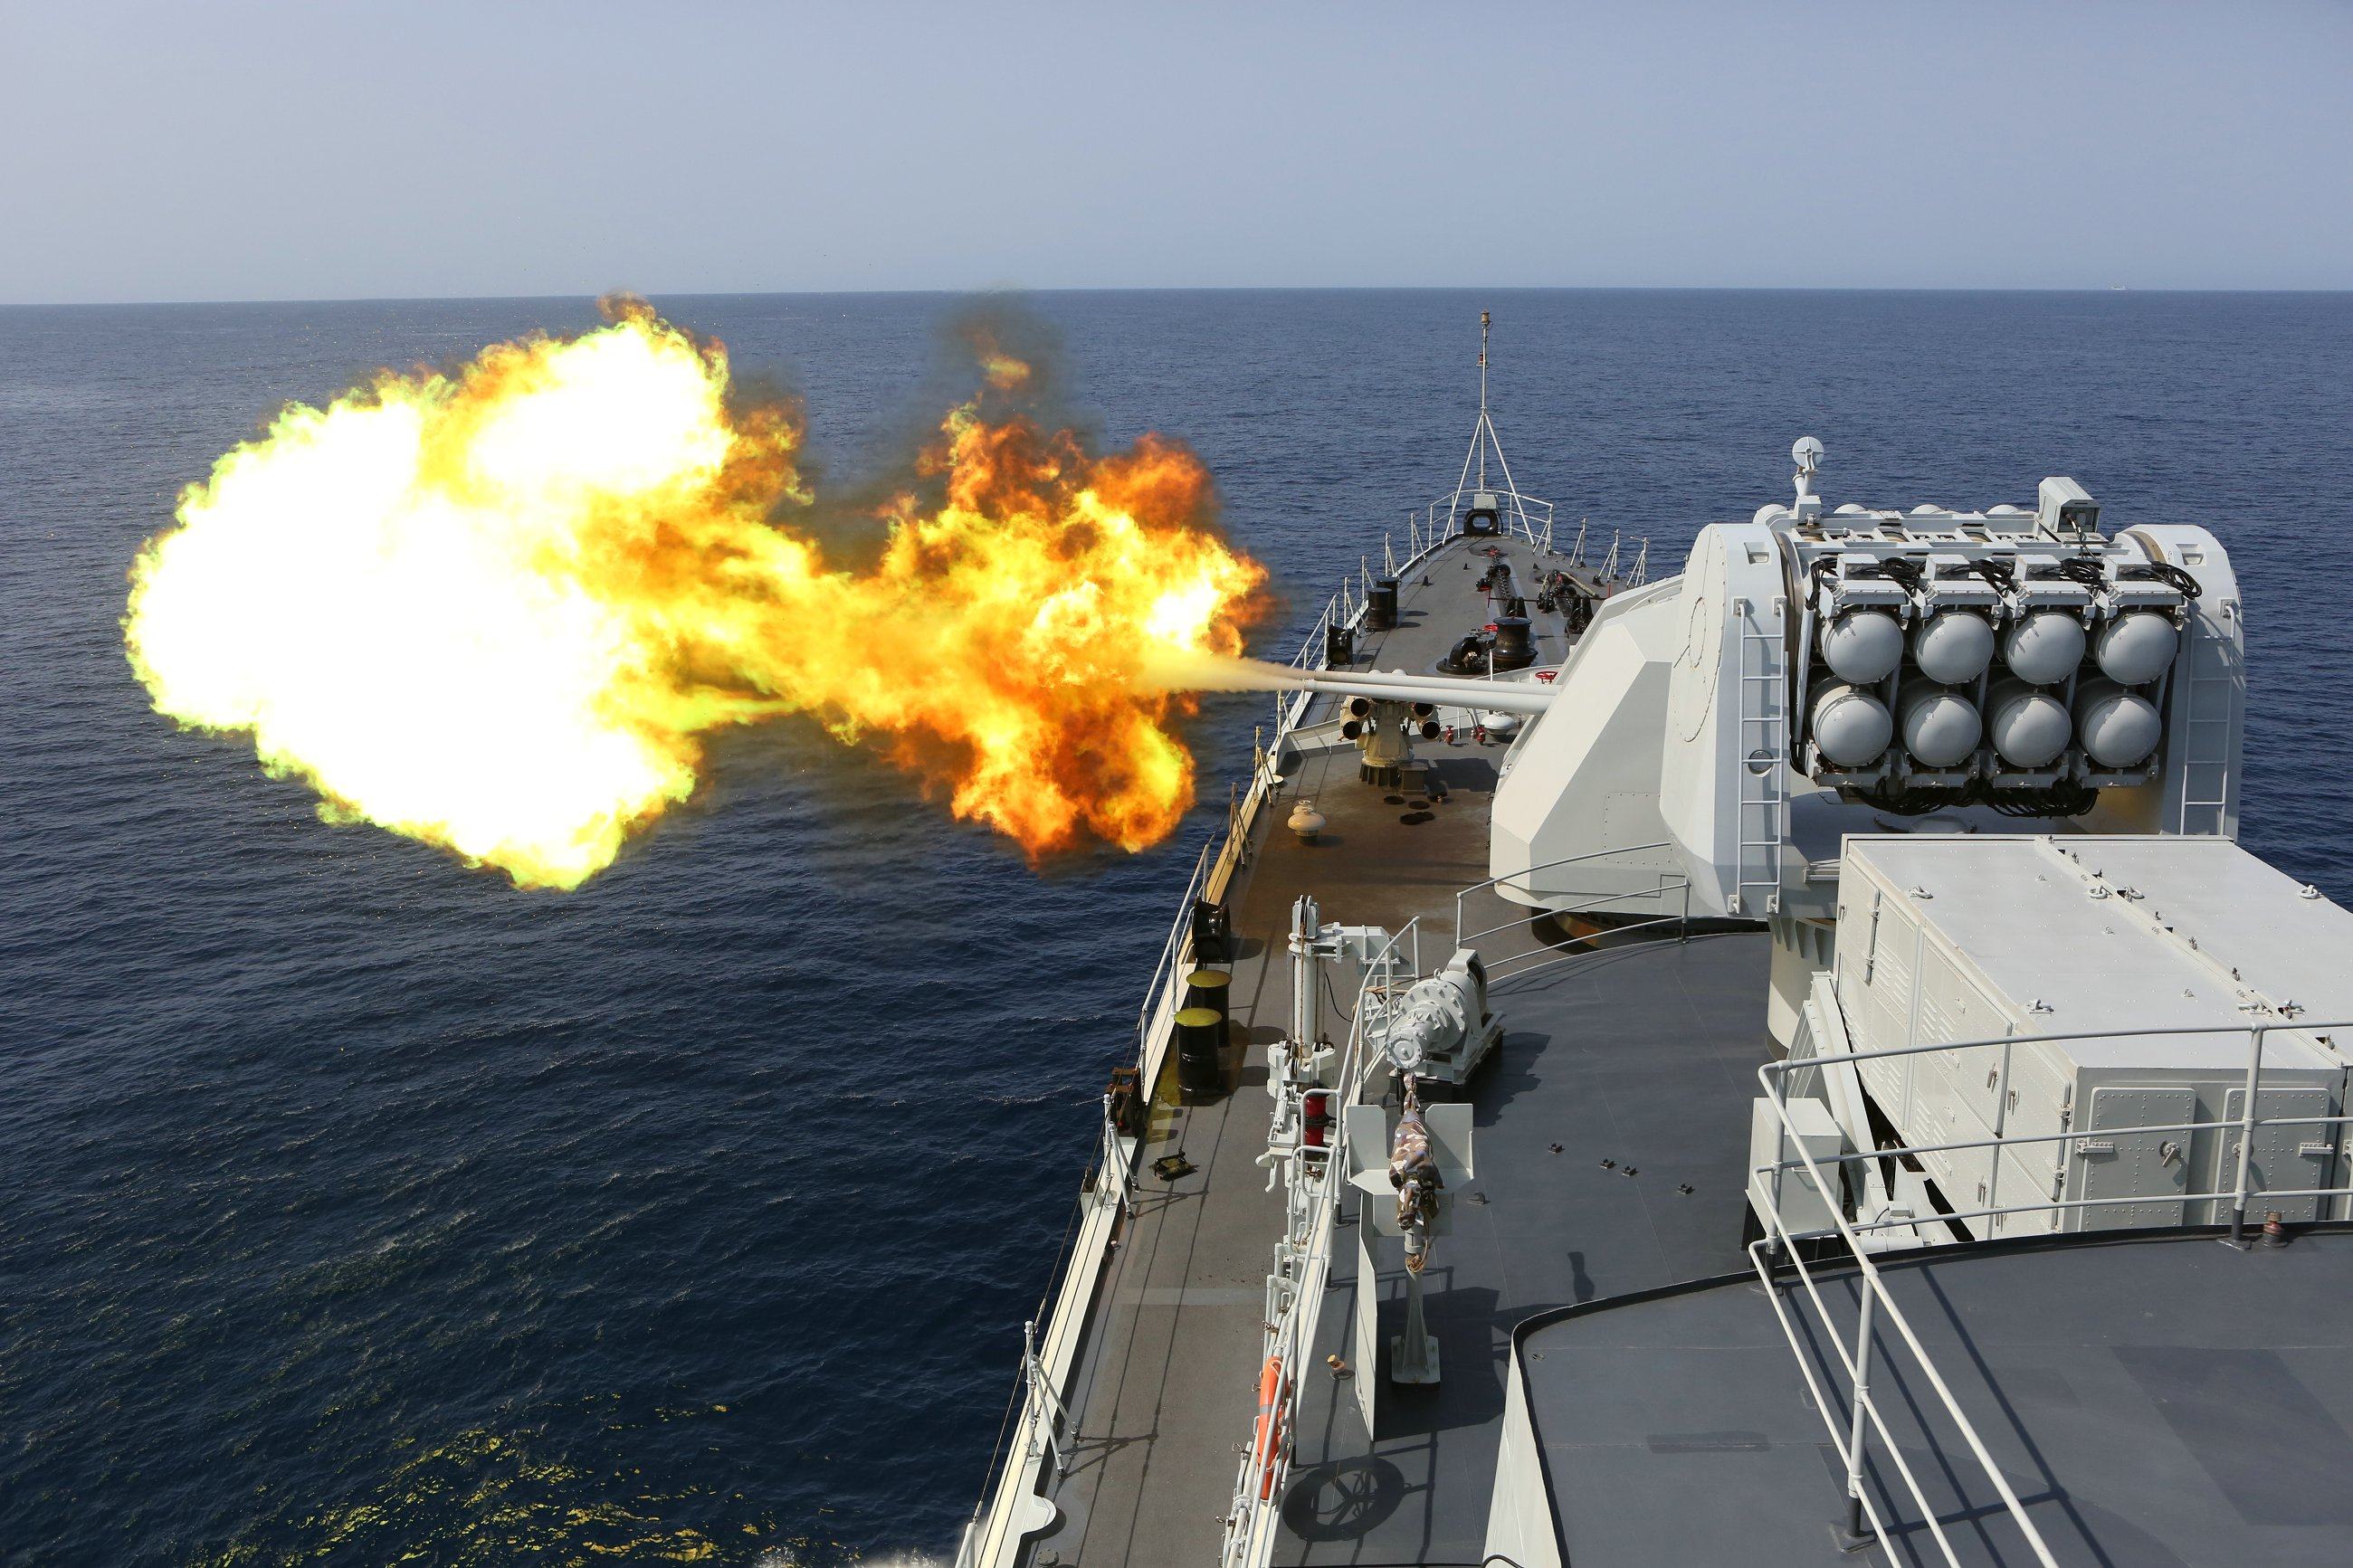 The PLA Navy missile destroyer Harbin participates in a counter-piracy exercise with the US Navy in the Gulf of Aden on August 25, 2013. The crisis in Sudan offers China and the United States another opportunity to cooperate to benefit the Global South. Photo: Xinhua